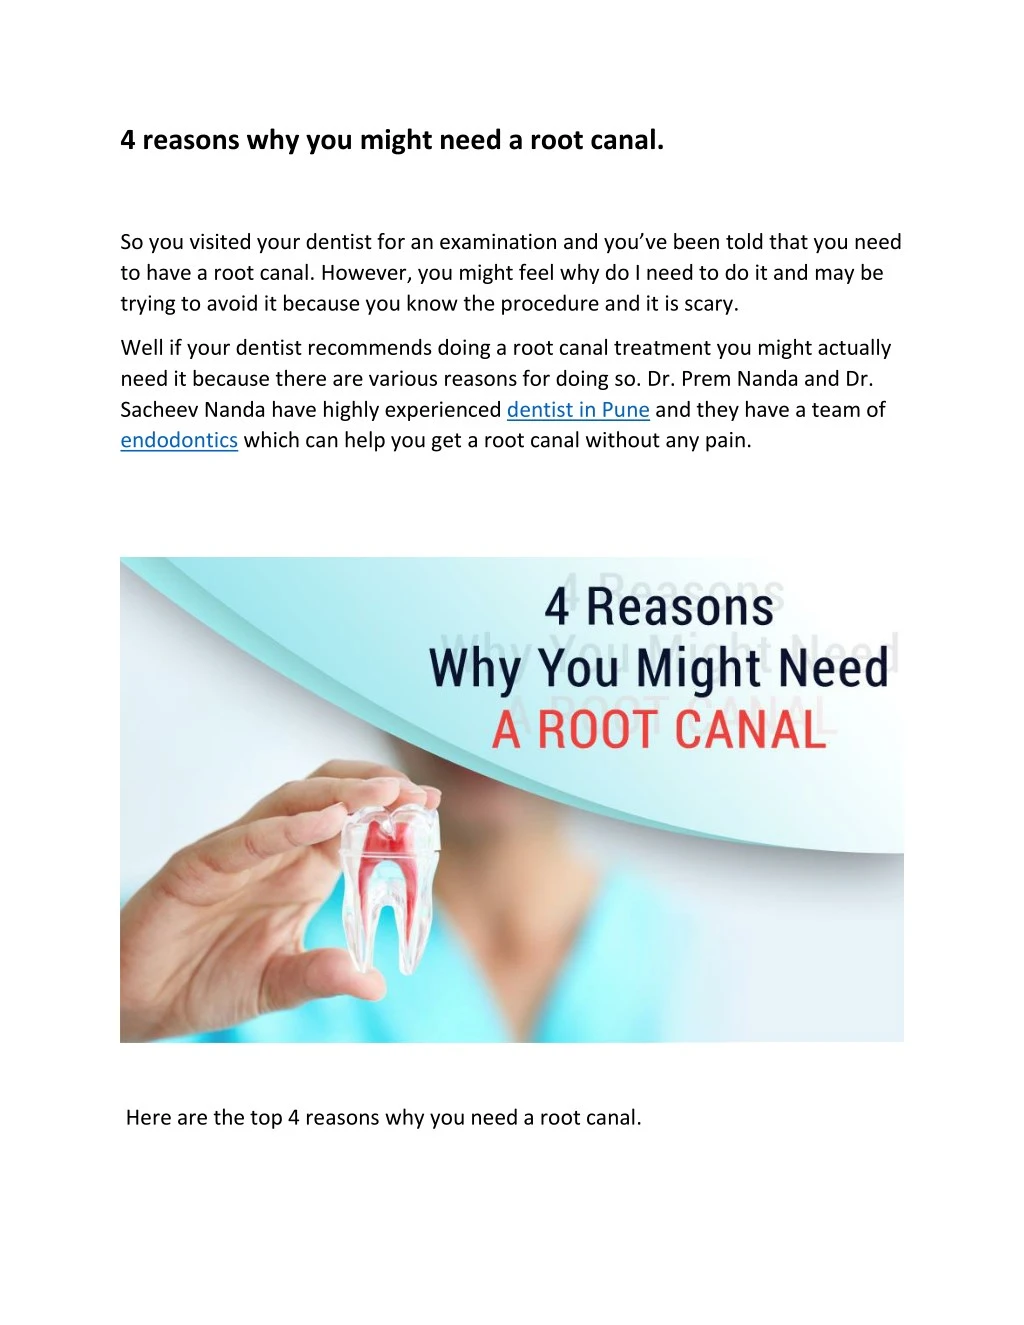 4 reasons why you might need a root canal